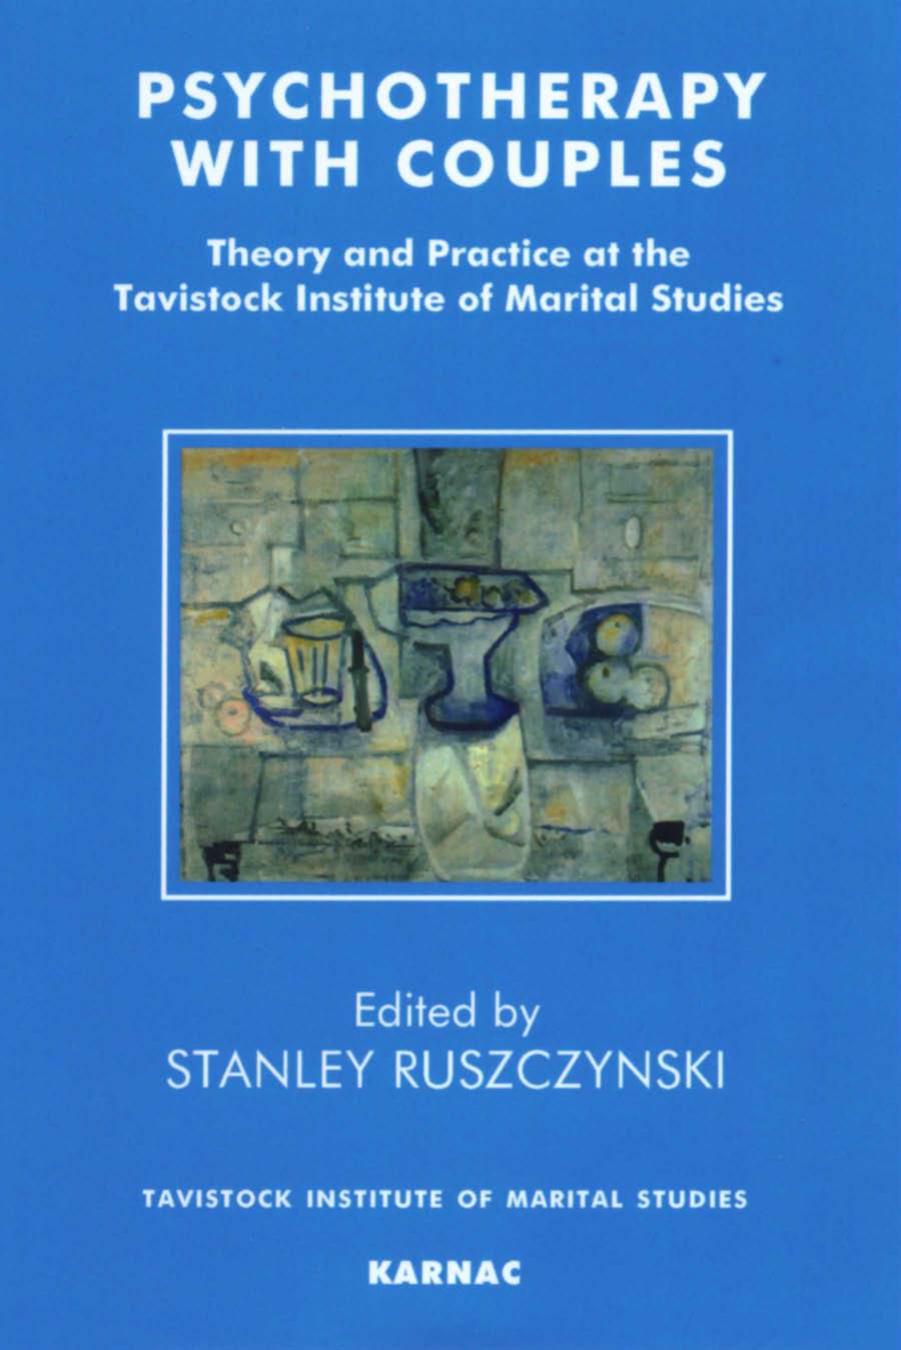 Psychotherapy With Couples: Theory and Practice at the Tavistock Institute of Marital Studies